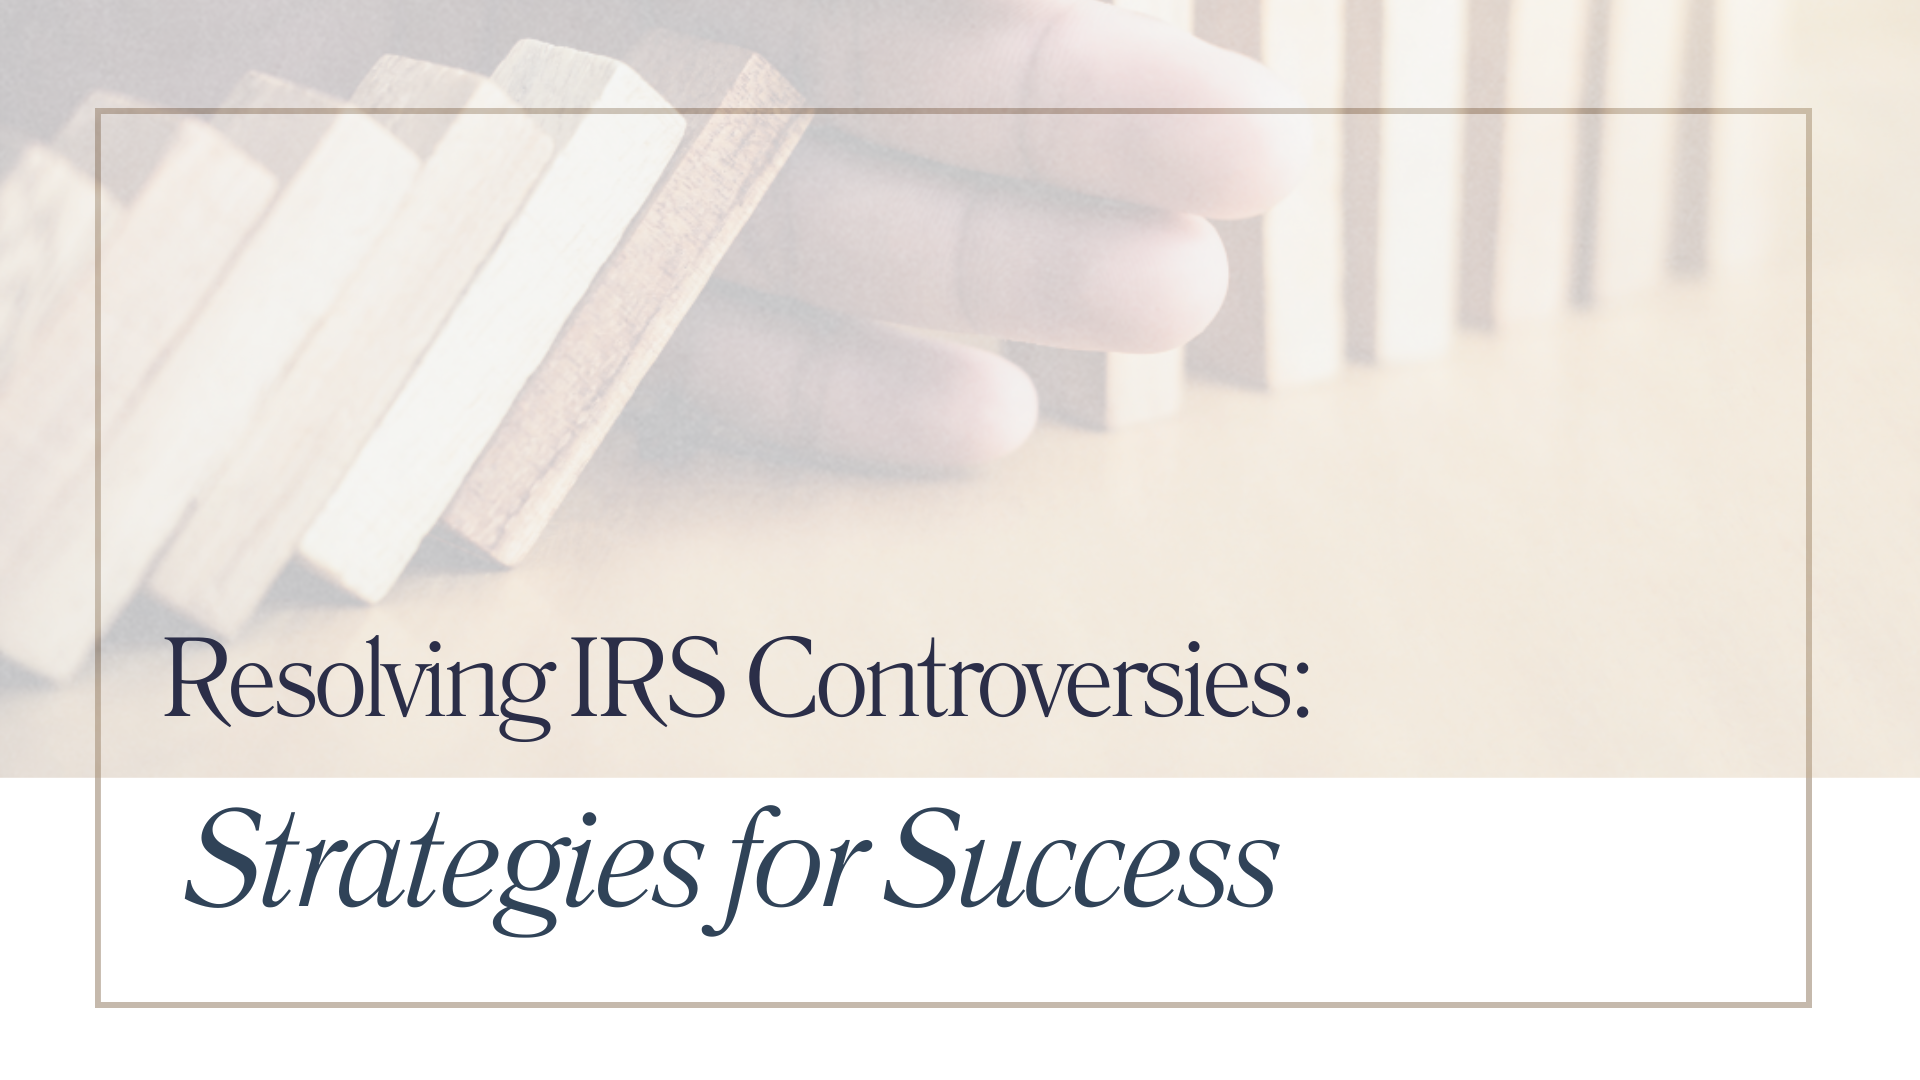 Featured image for “Resolving IRS Controversies: Strategies for Success”